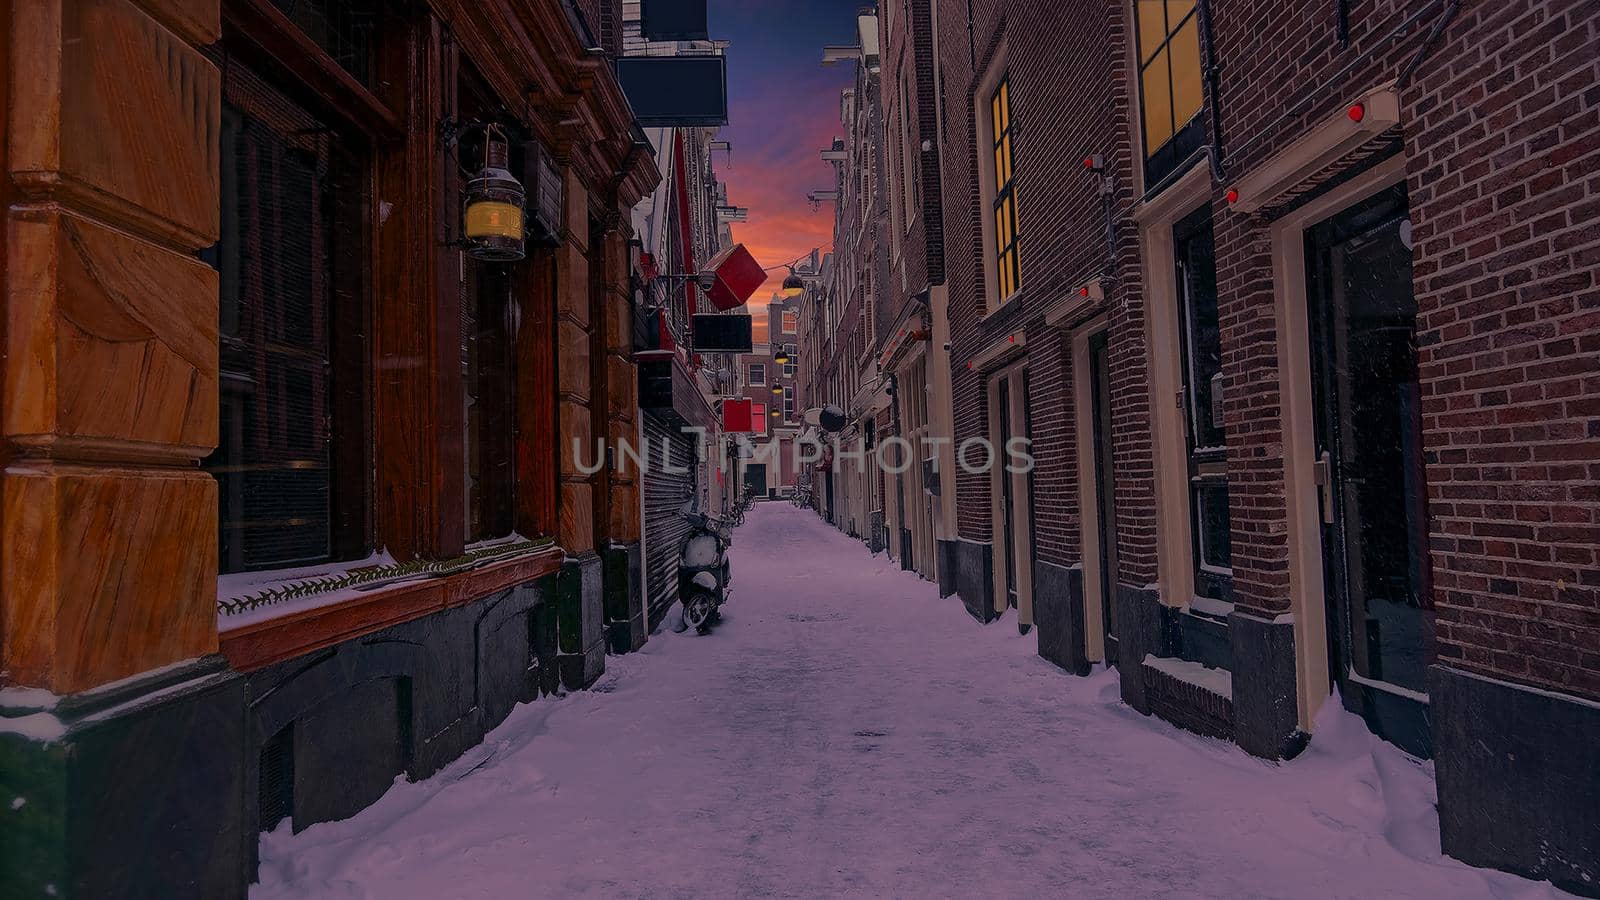 Snowy Red LIght District in winter in Amsterdam the Netherlands by devy